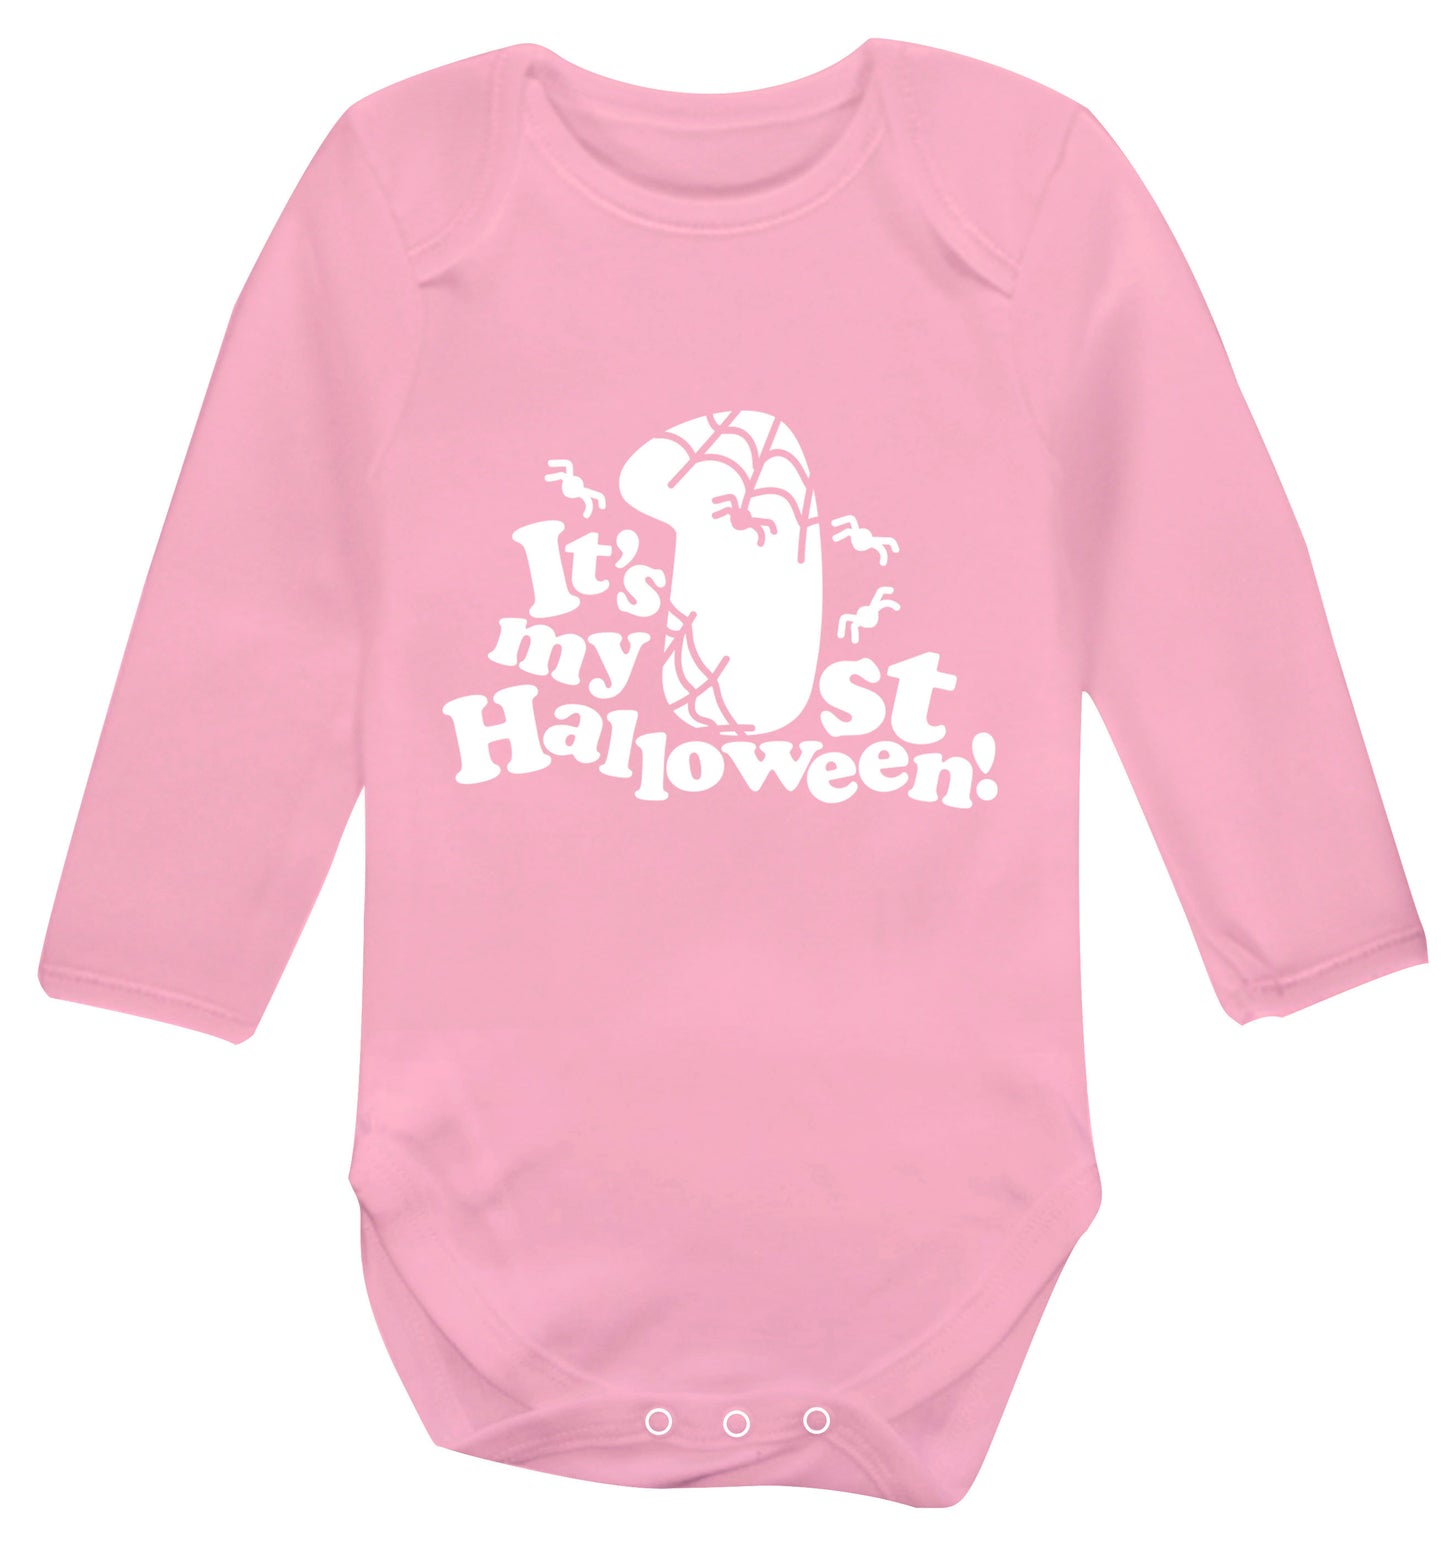 1st Halloween Baby Vest long sleeved pale pink 6-12 months